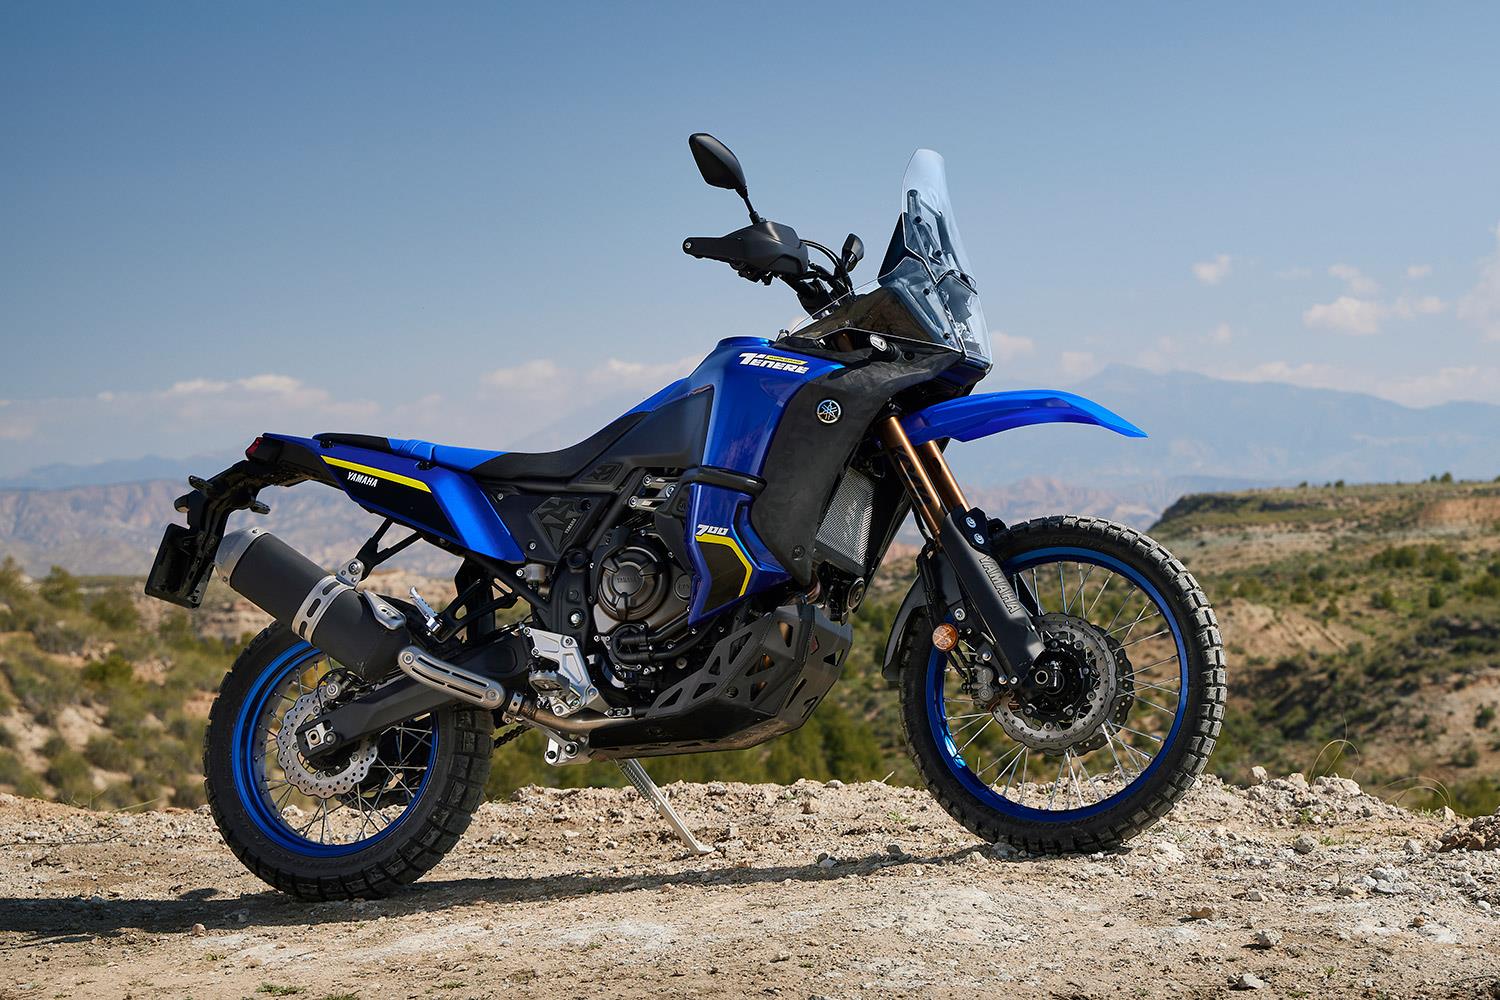 Yamaha Tenere 700 Review – The Best Adventure Motorcycle?